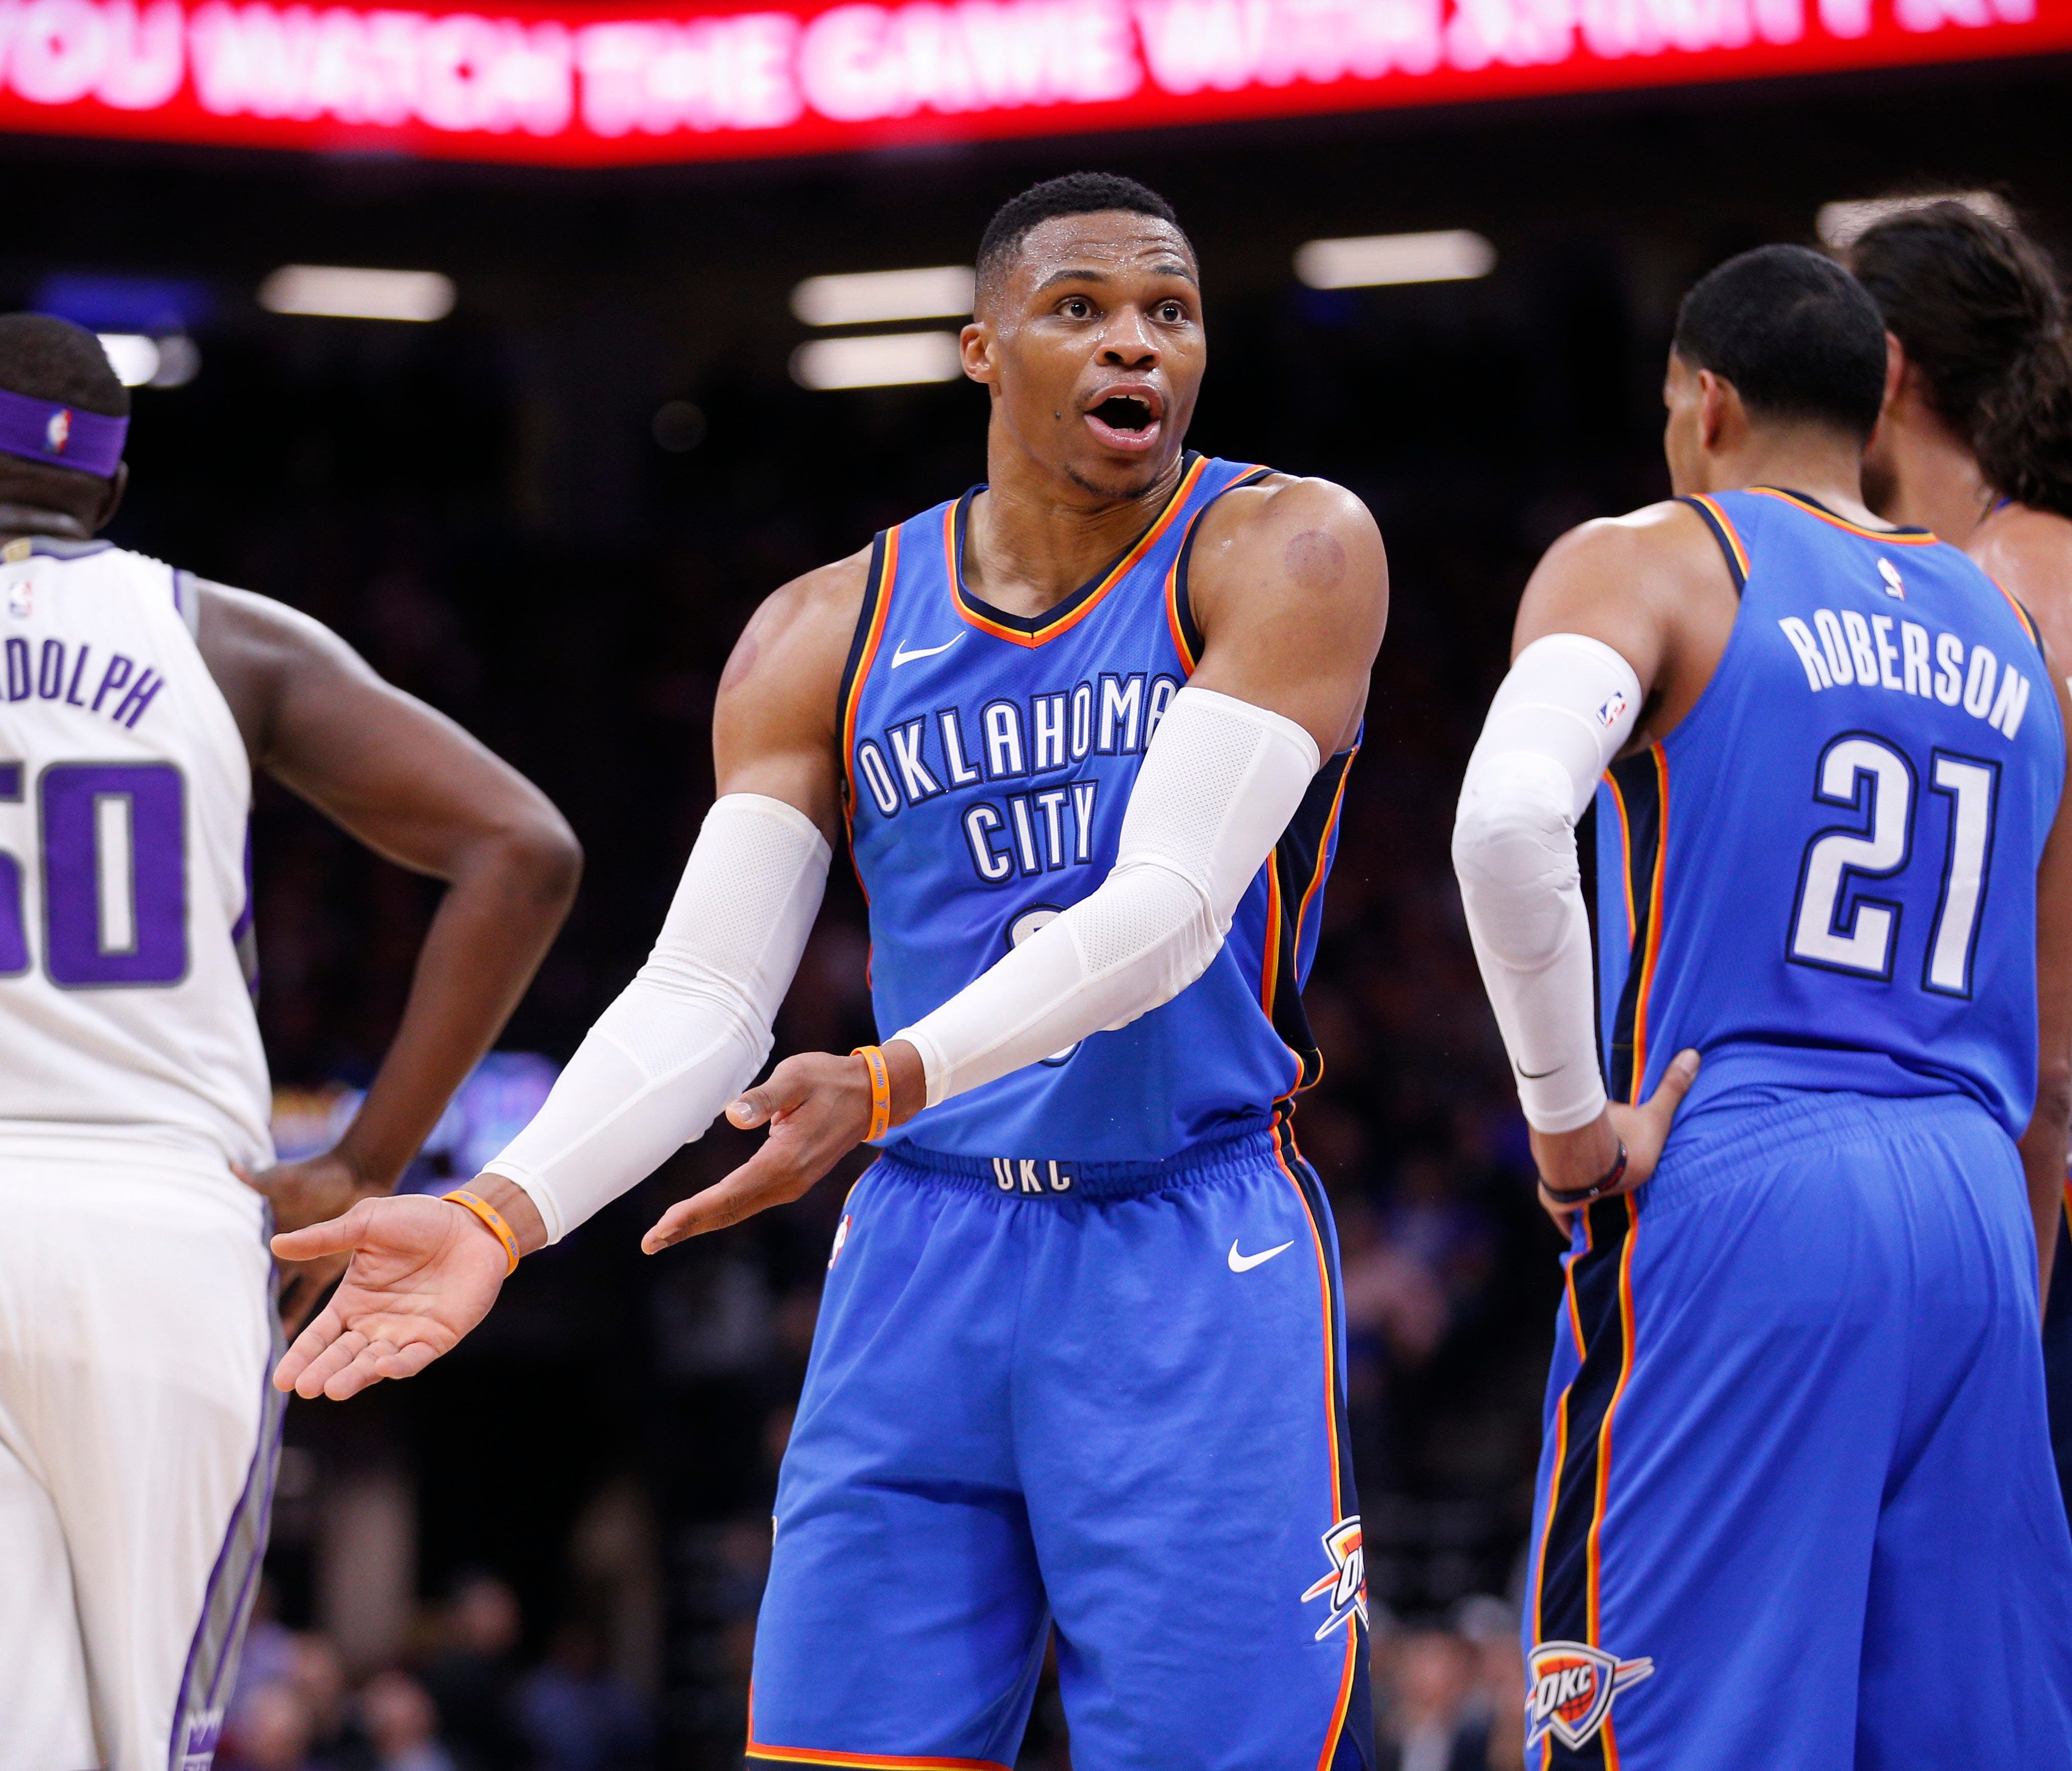 Oklahoma City Thunder guard Russell Westbrook (0) talks to a referee after a play against the Sacramento Kings in the third quarter at Golden 1 Center.